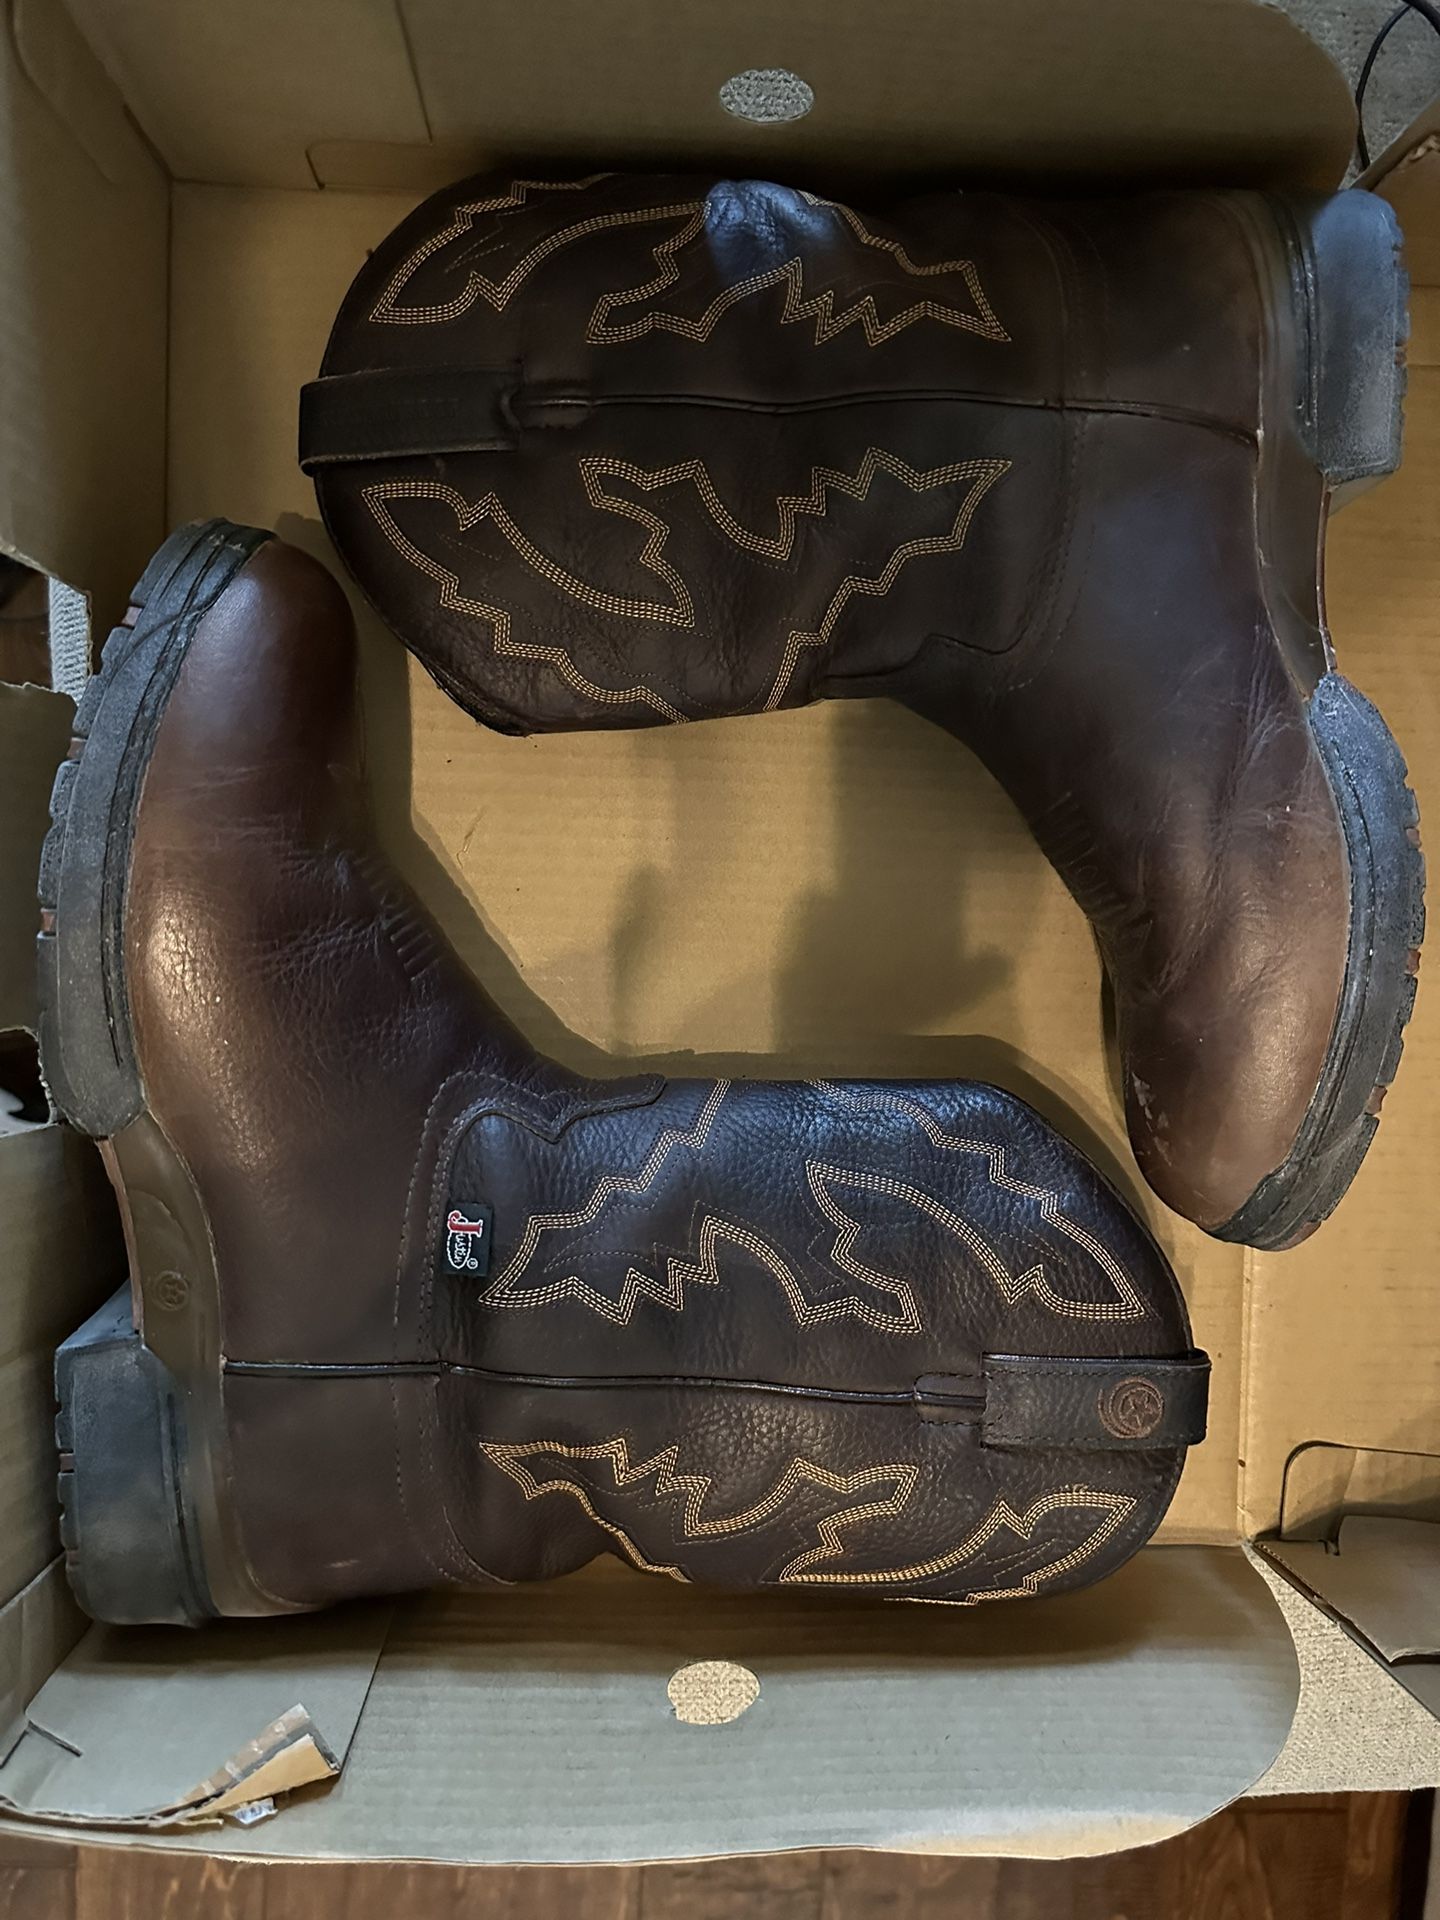 ARIAT Boots size 8 1/2 